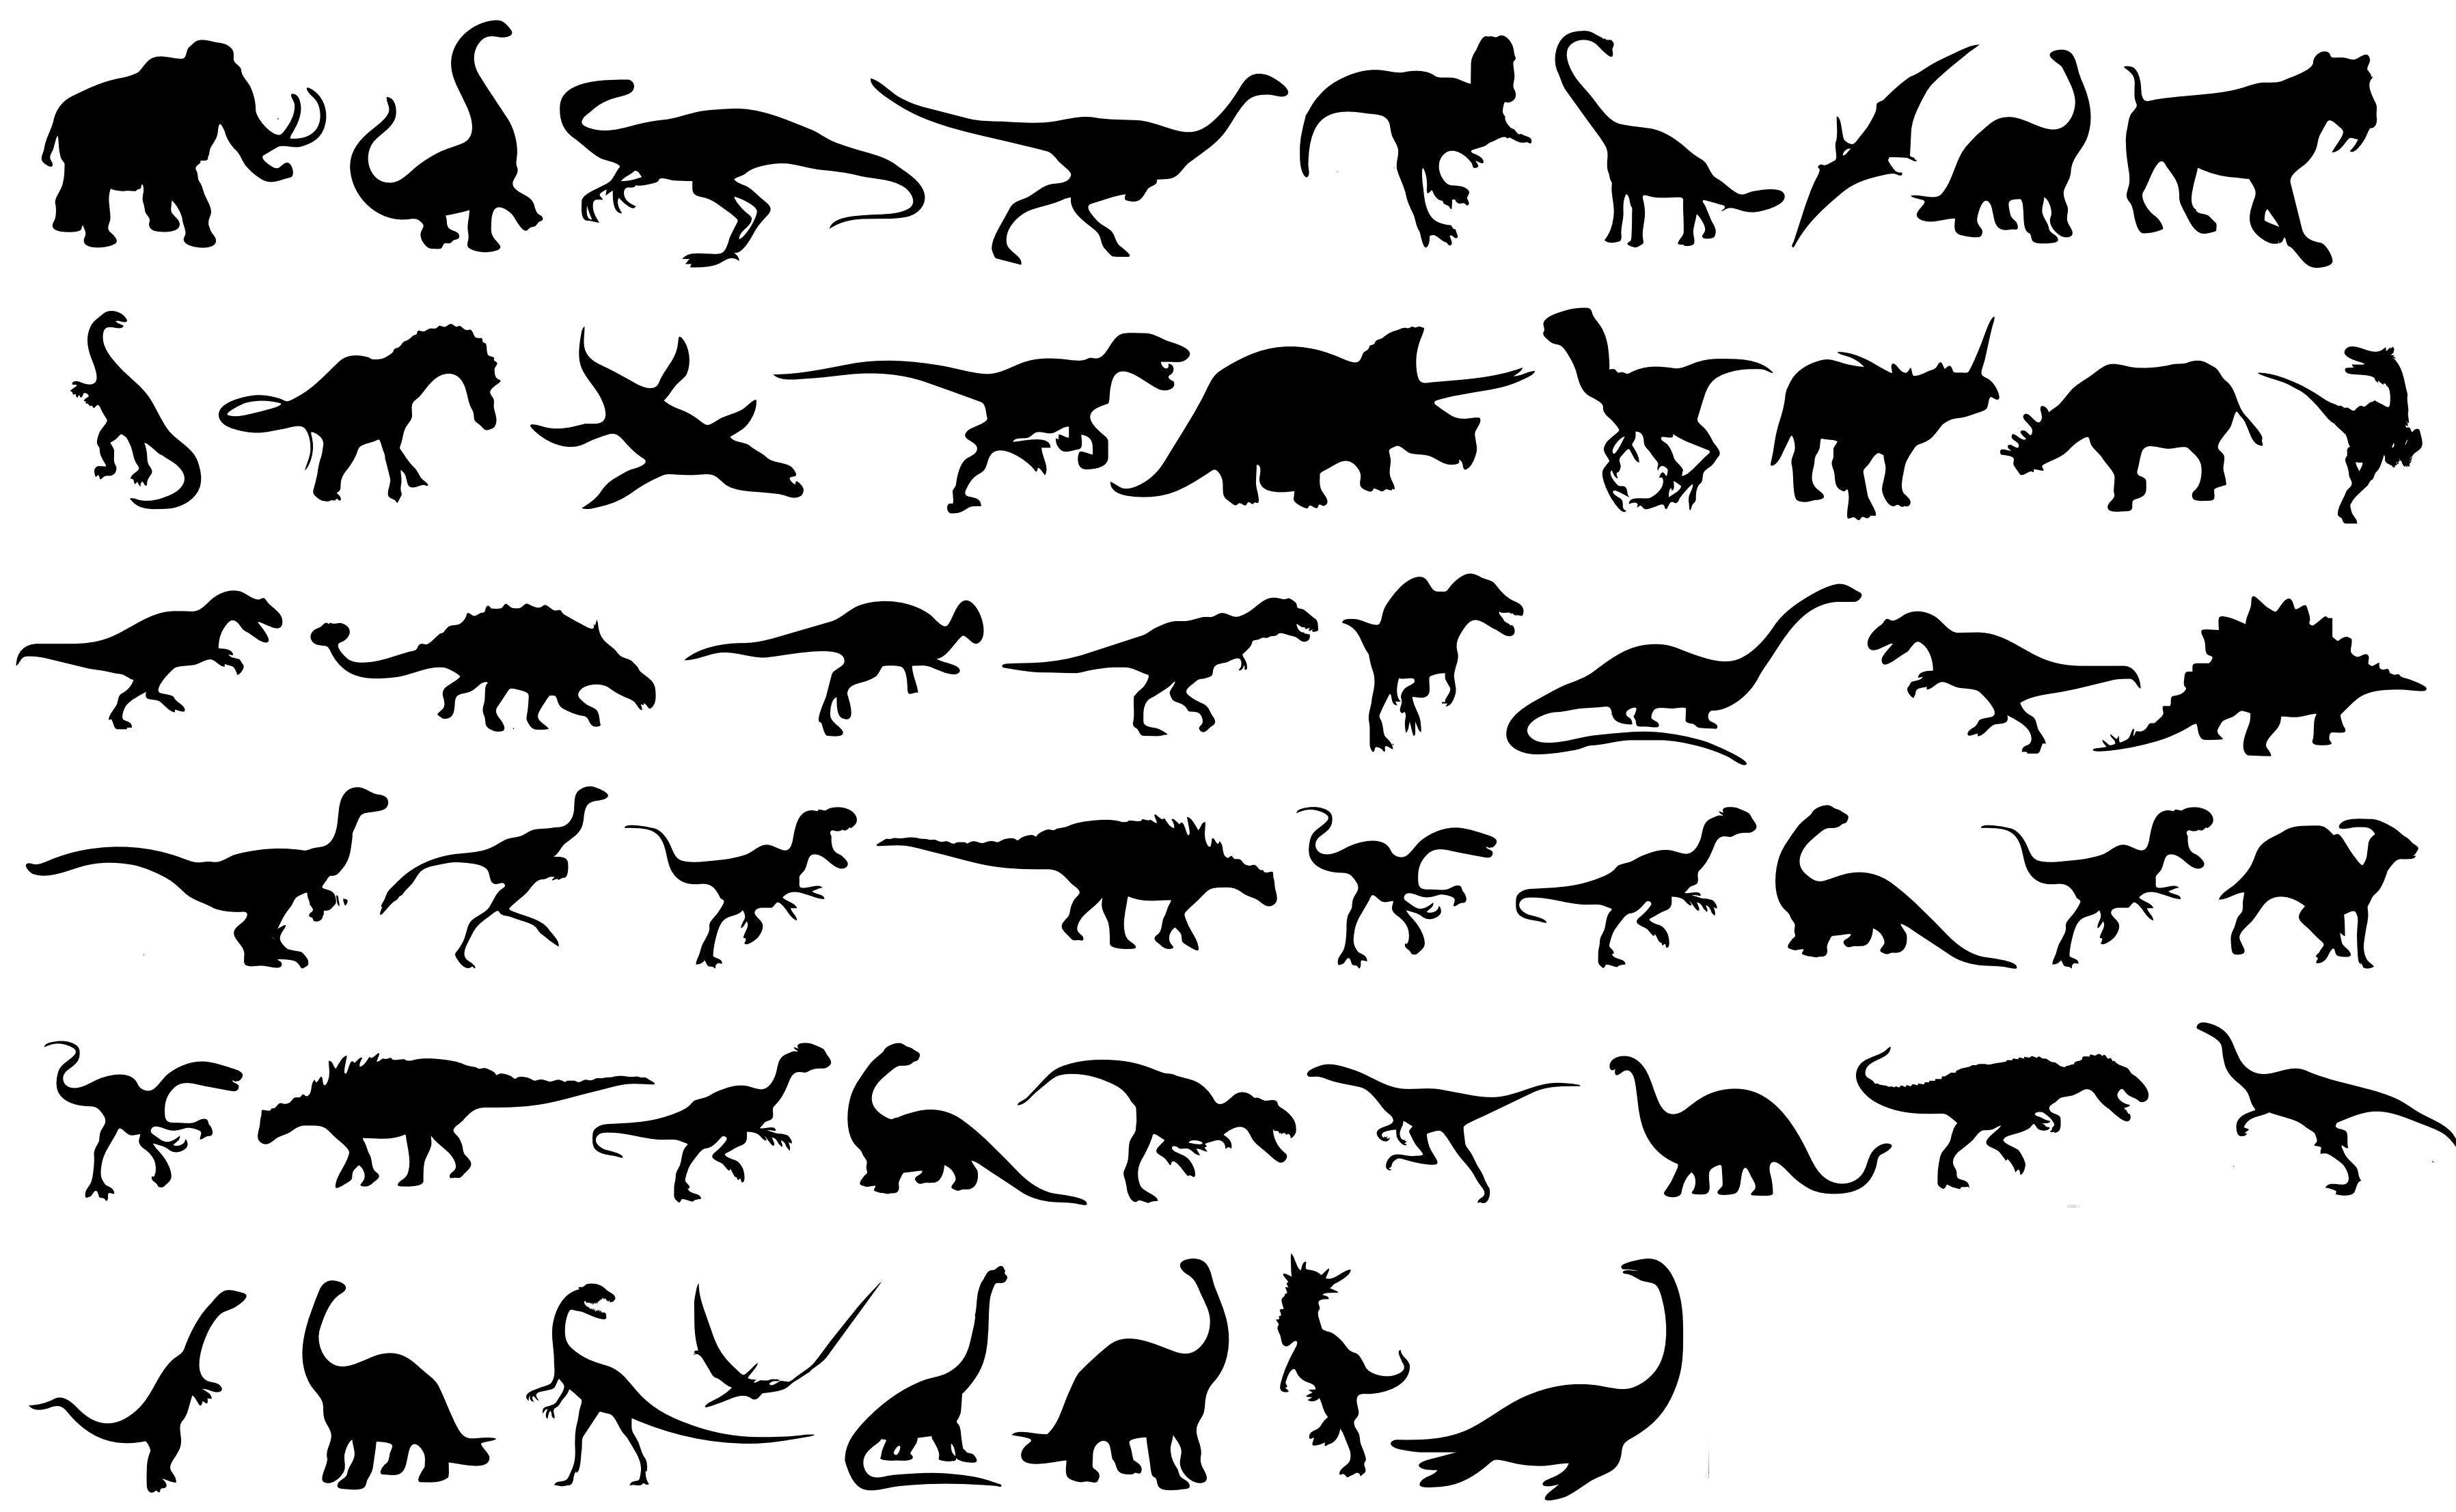 Dinosaurs Silhouettes